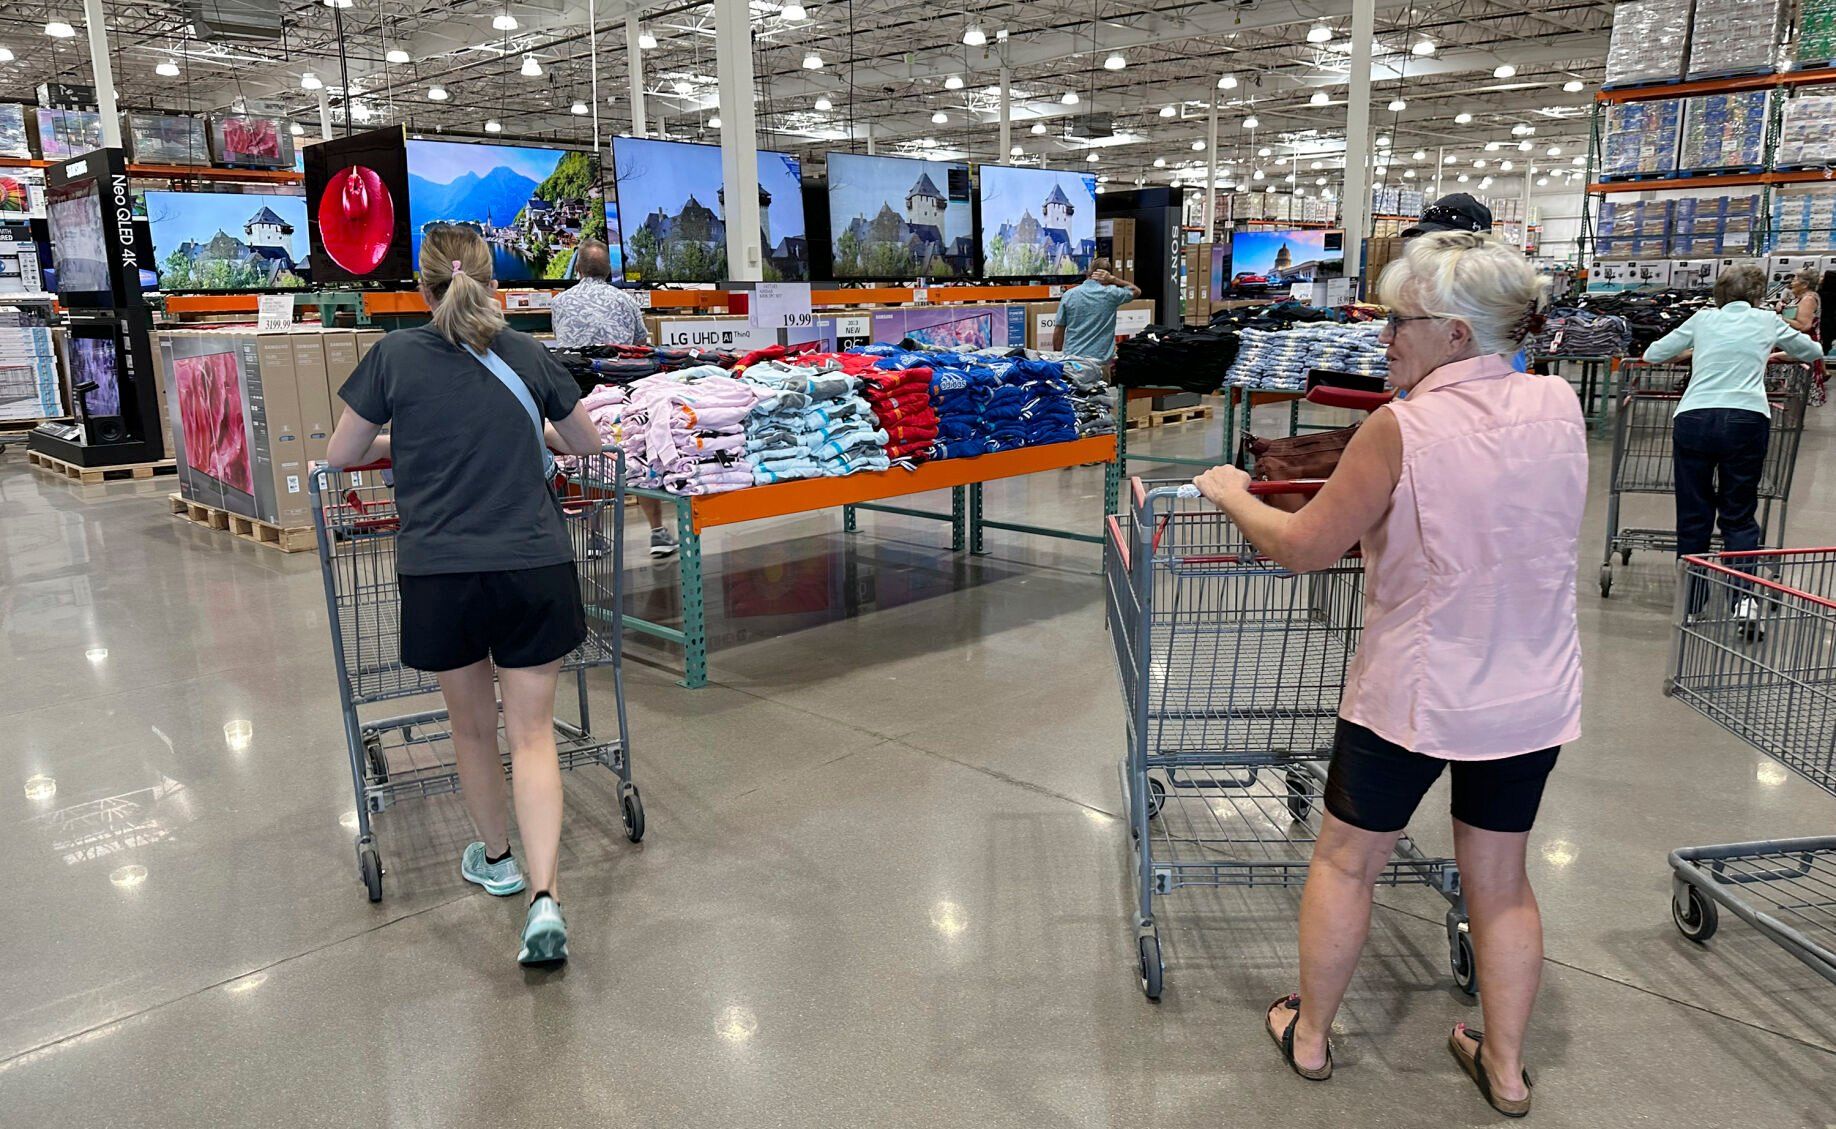 <p>File - Shoppers push carts into a Costco warehouse Friday, Aug. 4, 2023, in Thornton, Colo. A surge in U.S. consumer spending is fueling economic growth, reflecting a resilience among households that has confounded economists, Federal Reserve officials and even the sentiments that Americans themselves have expressed in surveys.(AP Photo/David Zalubowski, File)</p>   PHOTO CREDIT: David Zalubowski 